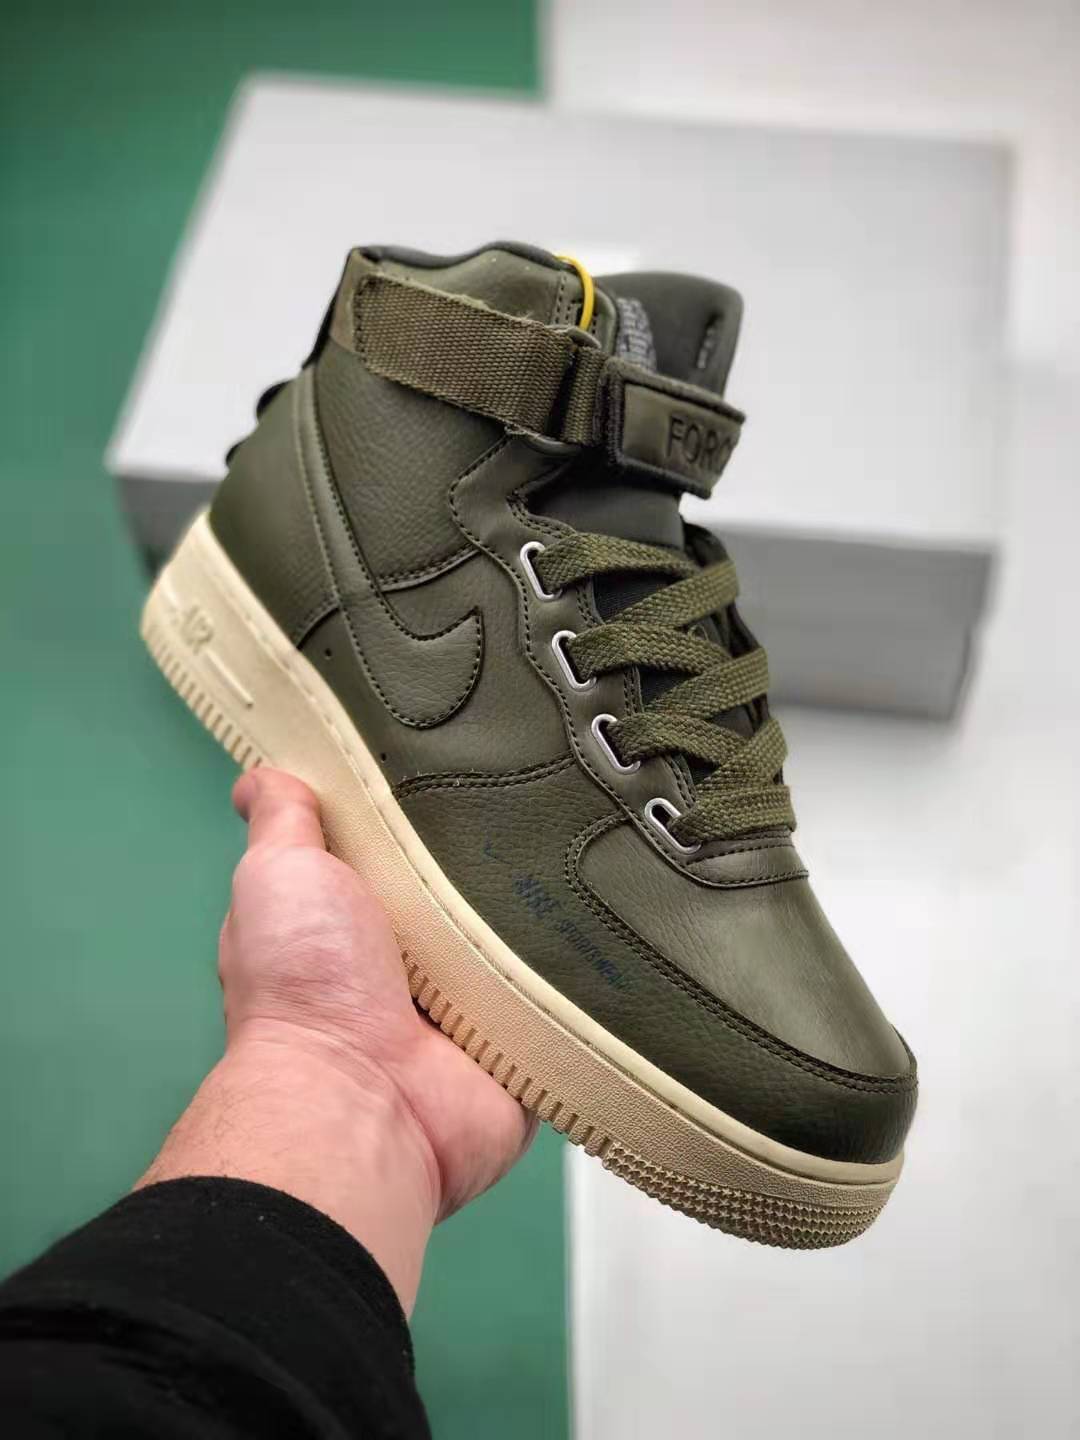 Nike Air Force 1 High Utility Olive Canvas AJ7311-300 - Premium Style and Durability